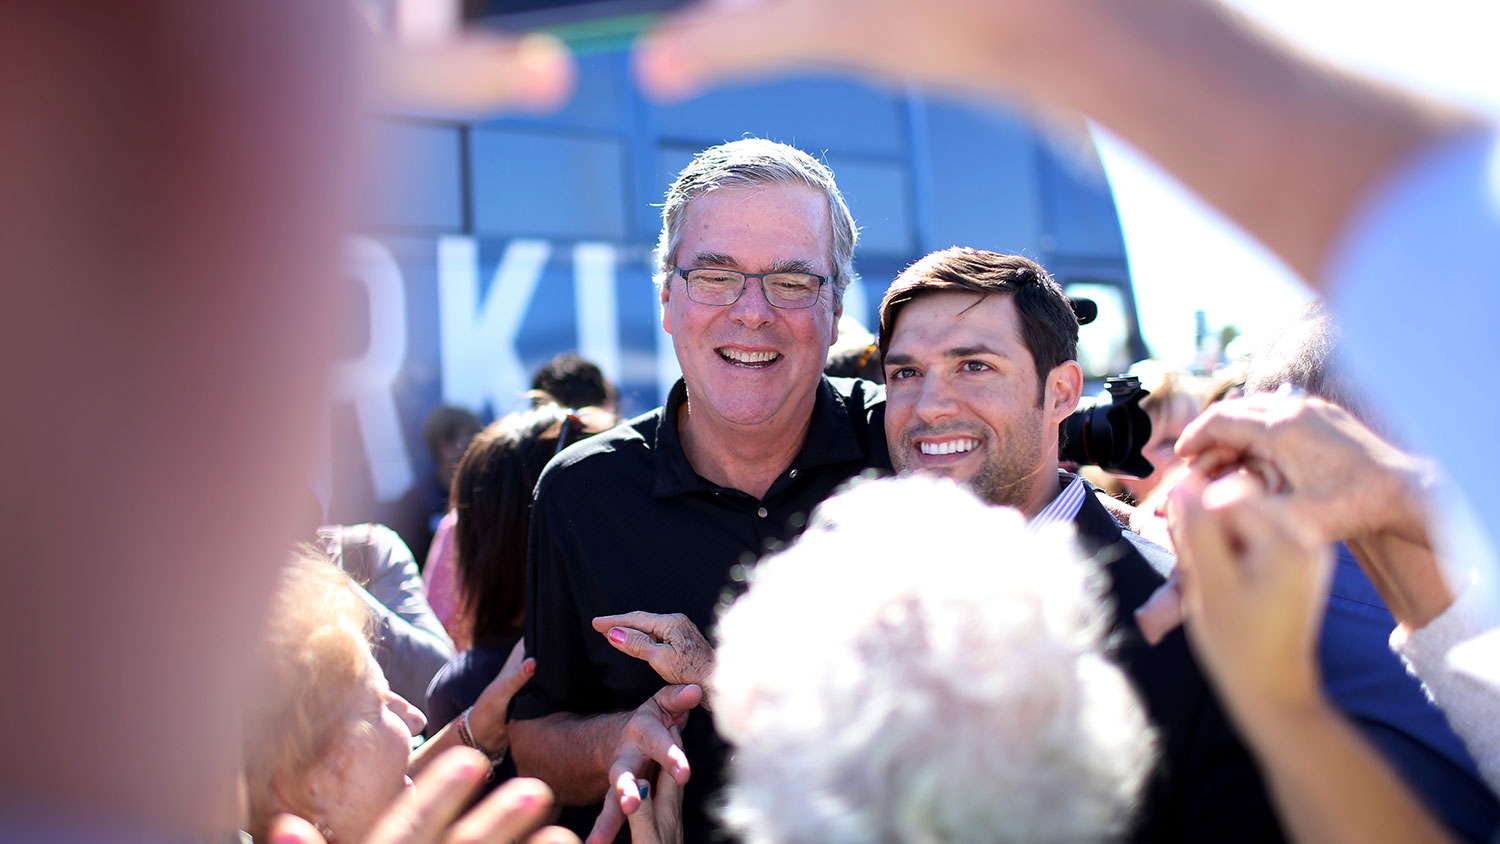 Former Florida Governor Jeb Bush campaigns with Florida Governor Rick Scott during a stop at Milander Park on November 2, 2014 in Hialeah, Florida.
